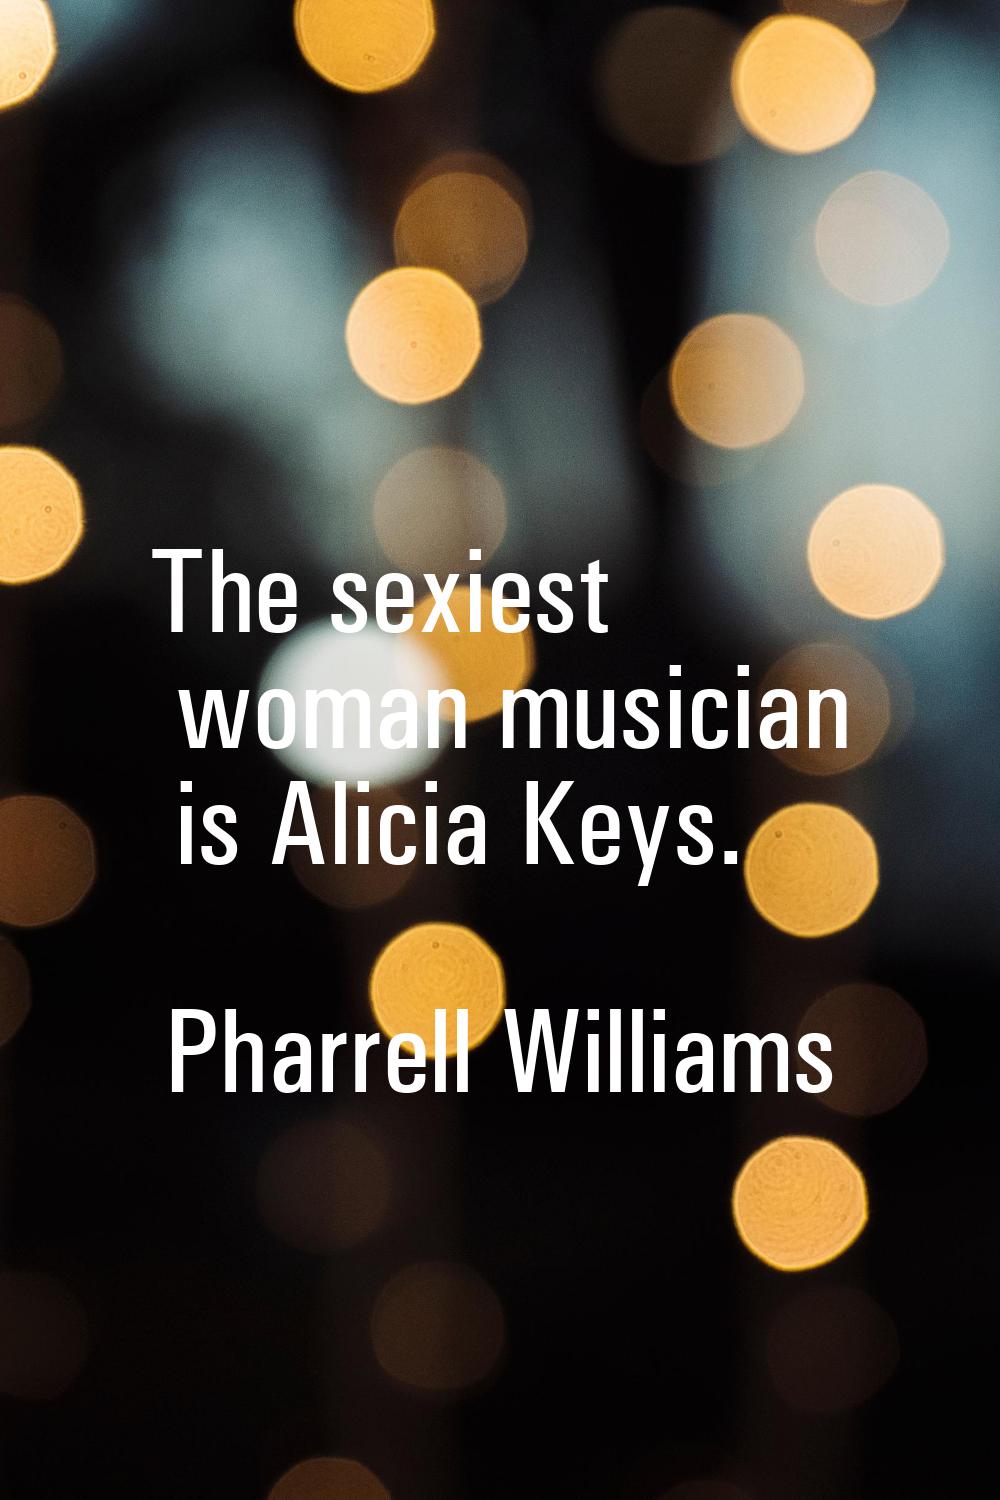 The sexiest woman musician is Alicia Keys.